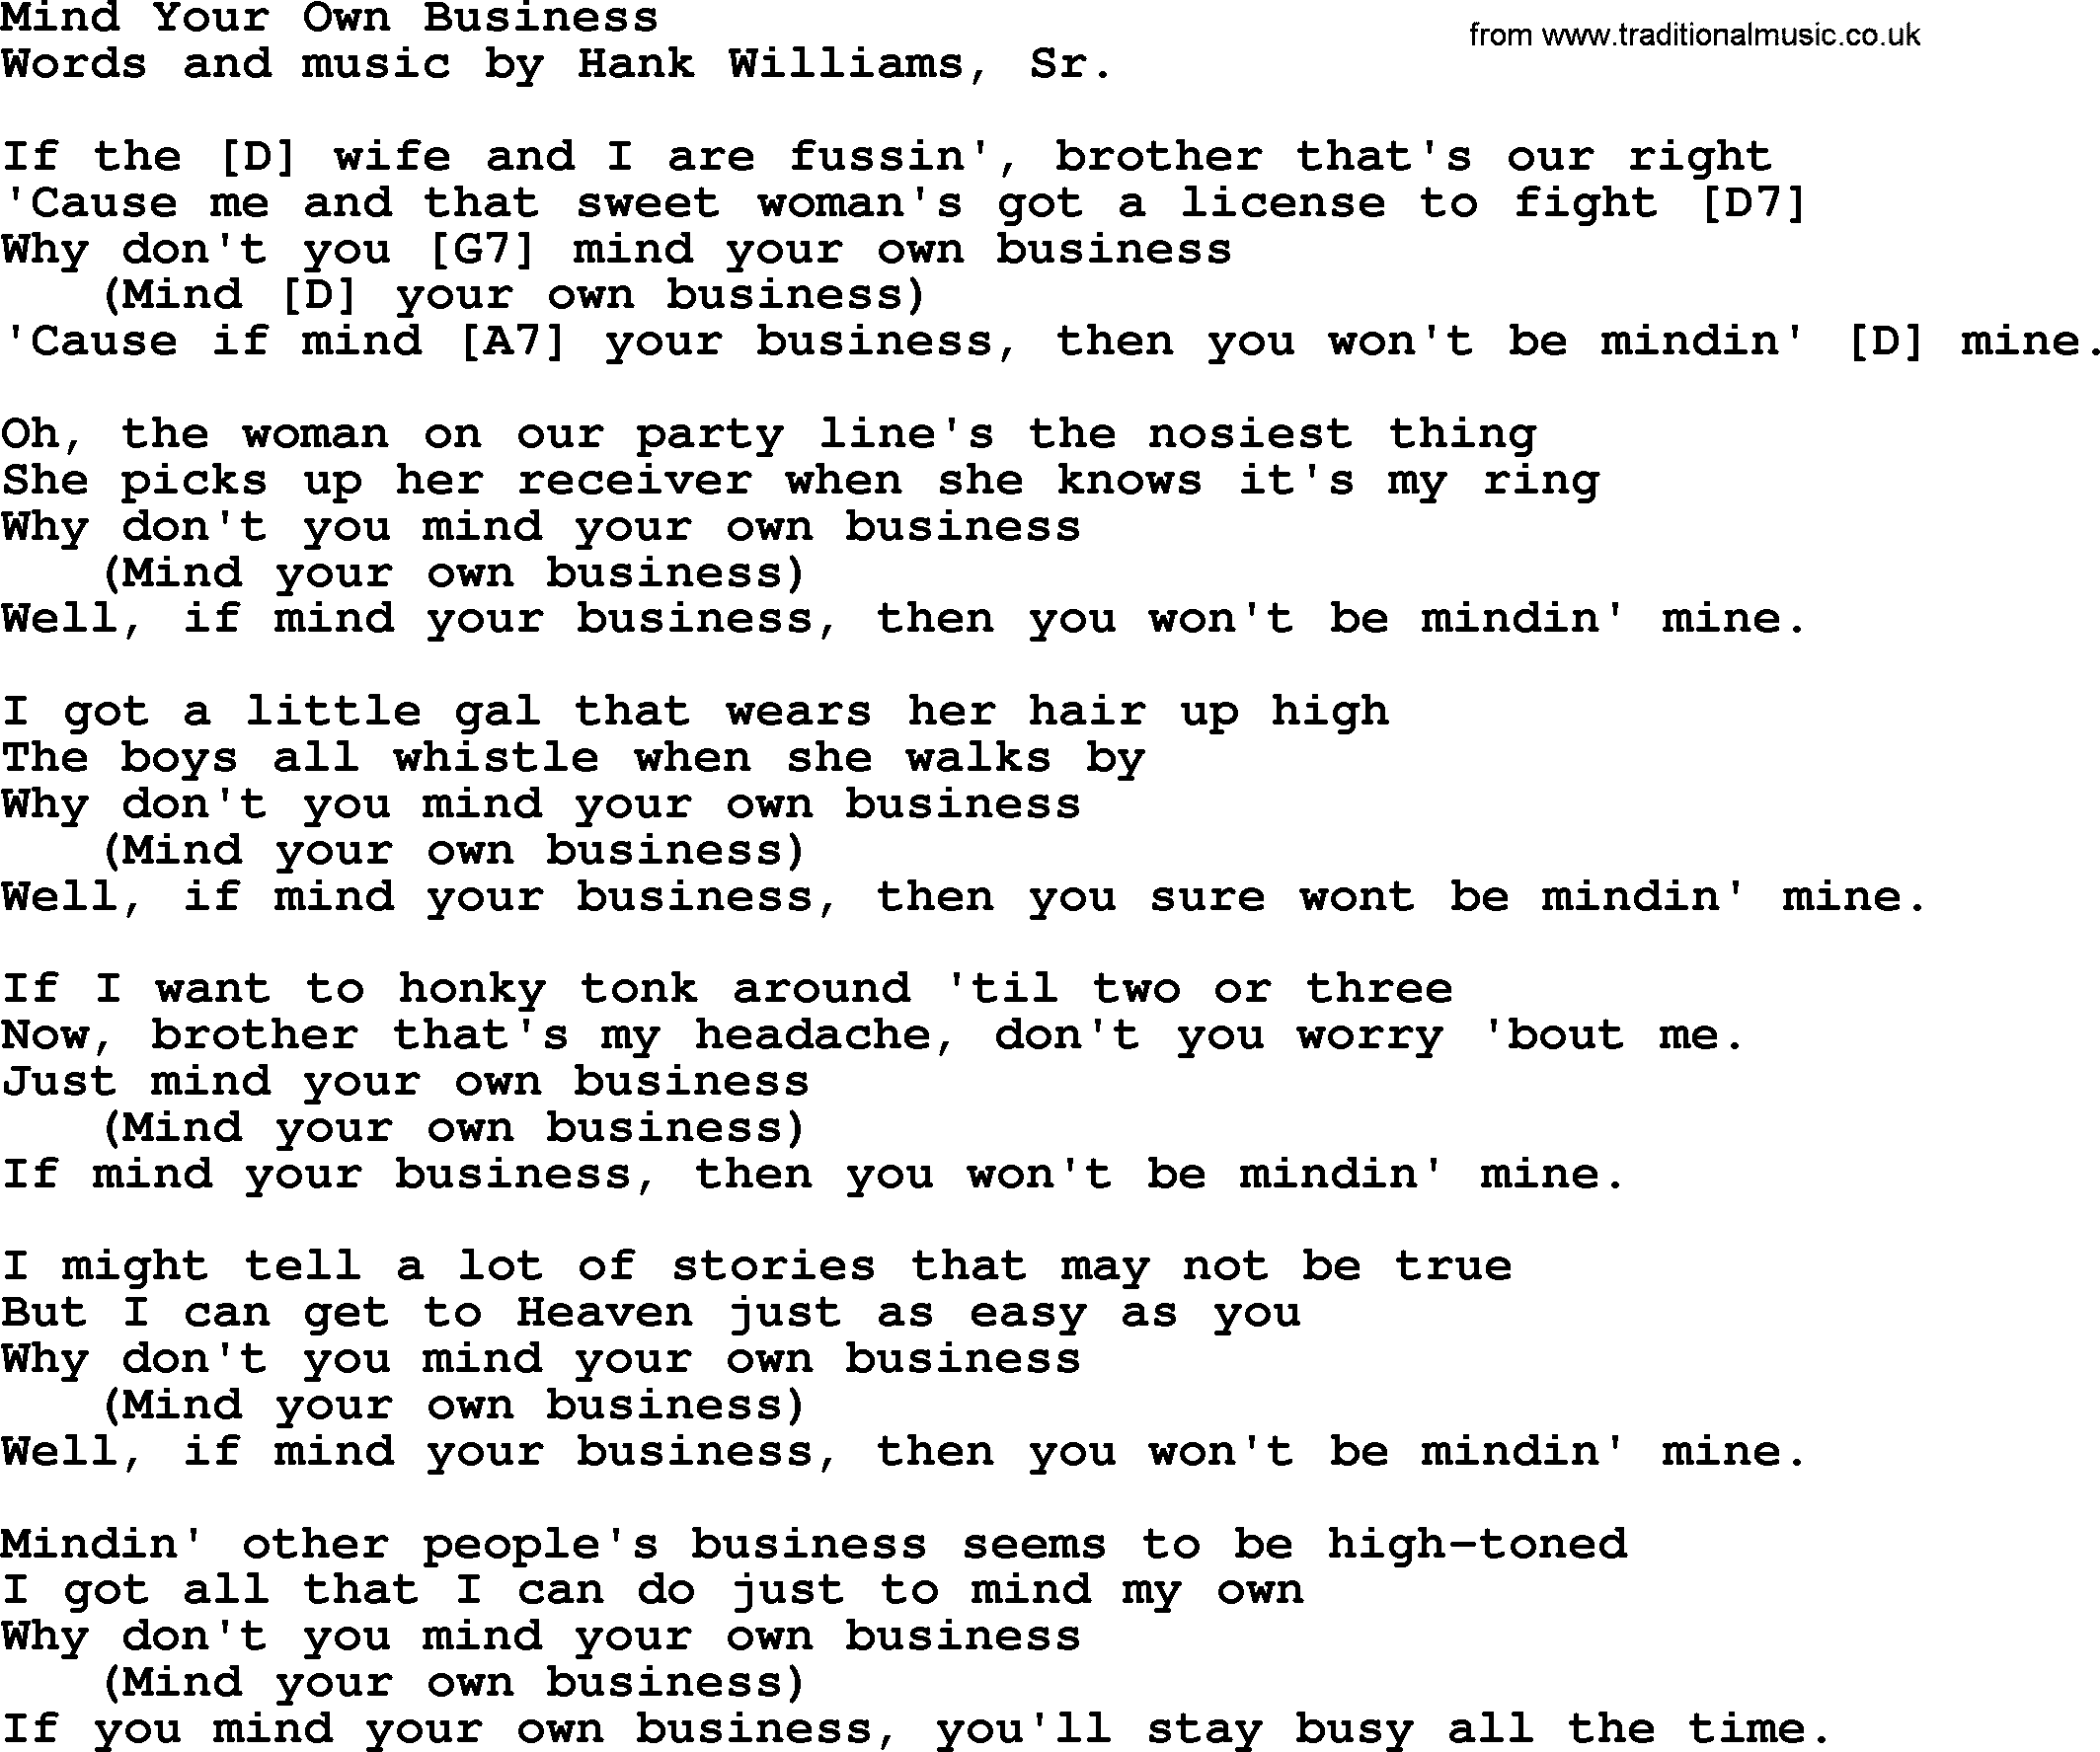 Hank Williams song Mind Your Own Business, lyrics and chords